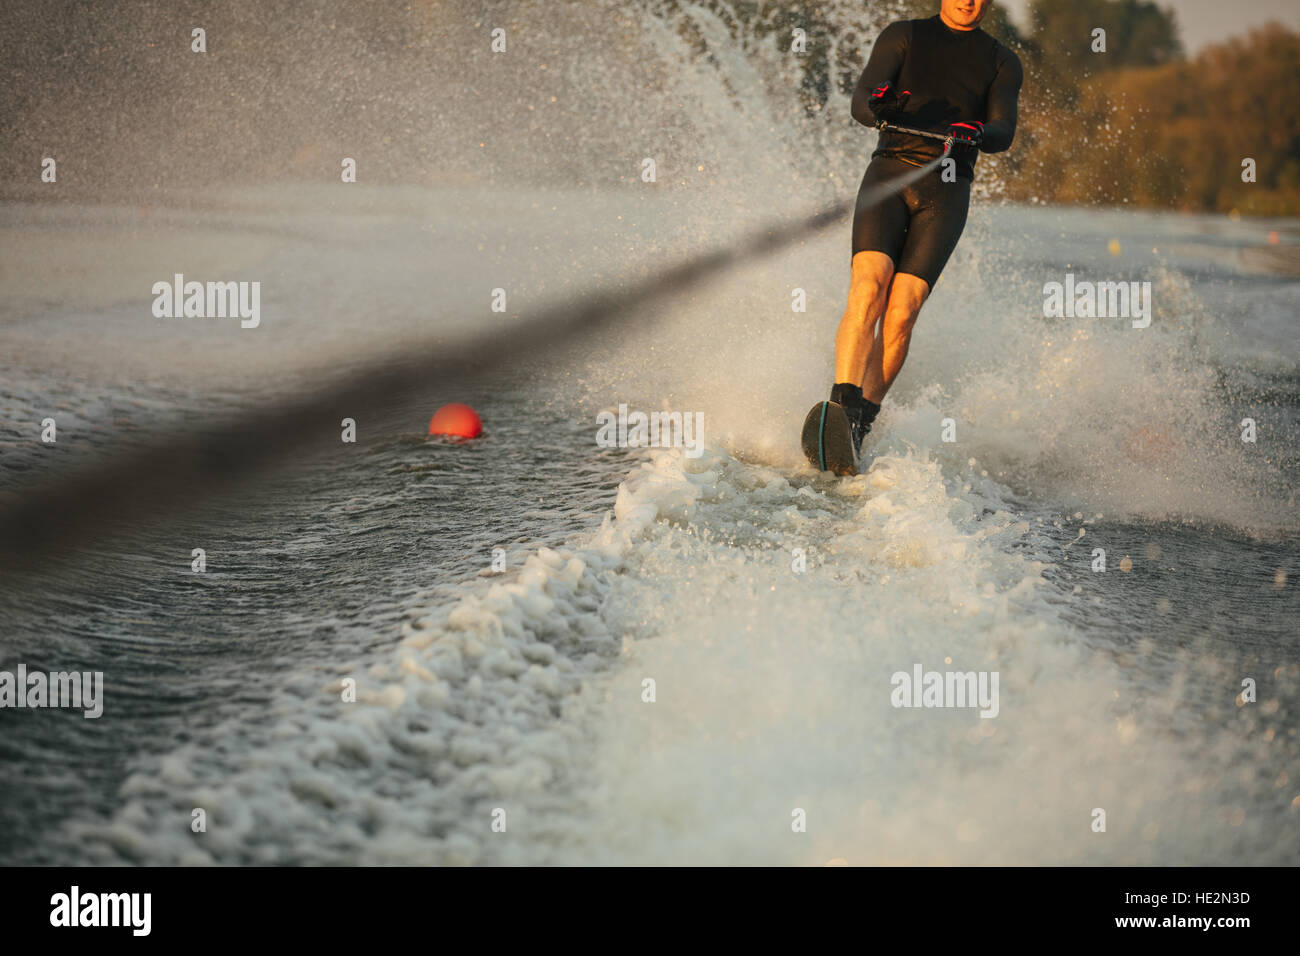 Man riding wakeboard on wave of motorboat in a lake. Male water skiing behind a boat. Stock Photo